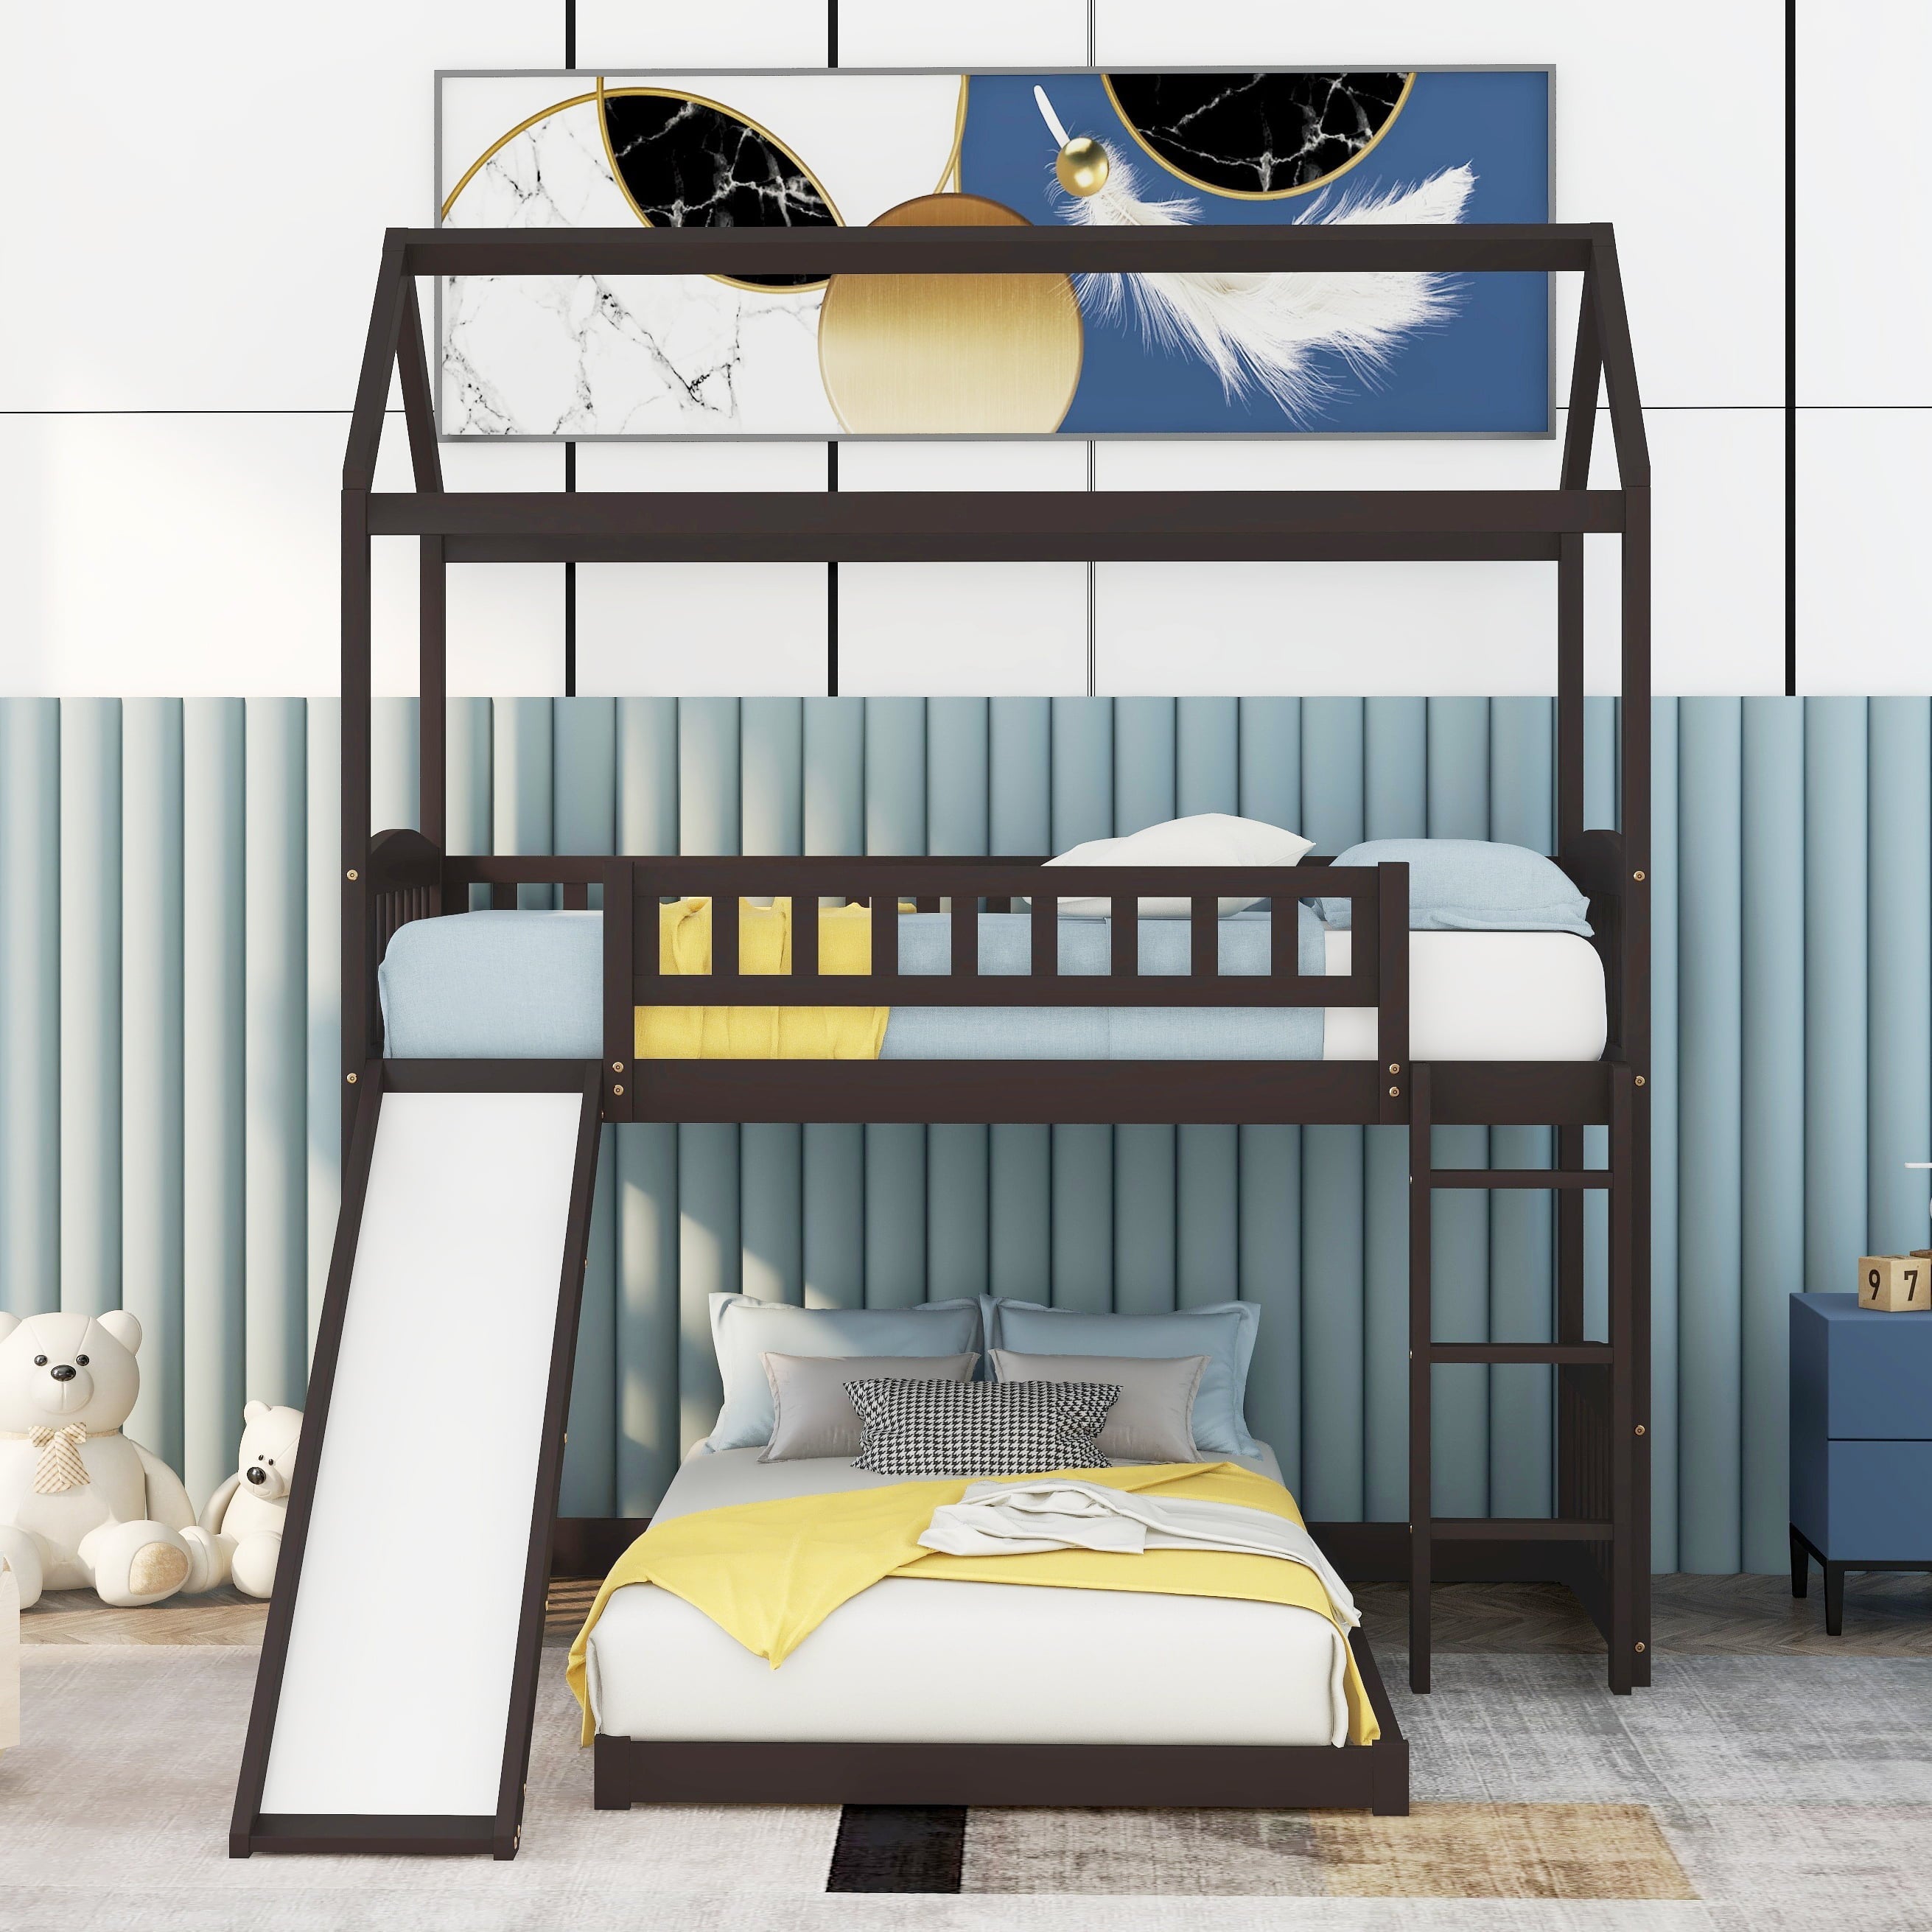 Bellemave House Bunk Bed with Slide, Wood Twin Over Twin L-Shape Bunk Bed Frame with Ladder for Kids Teens (Espresso)